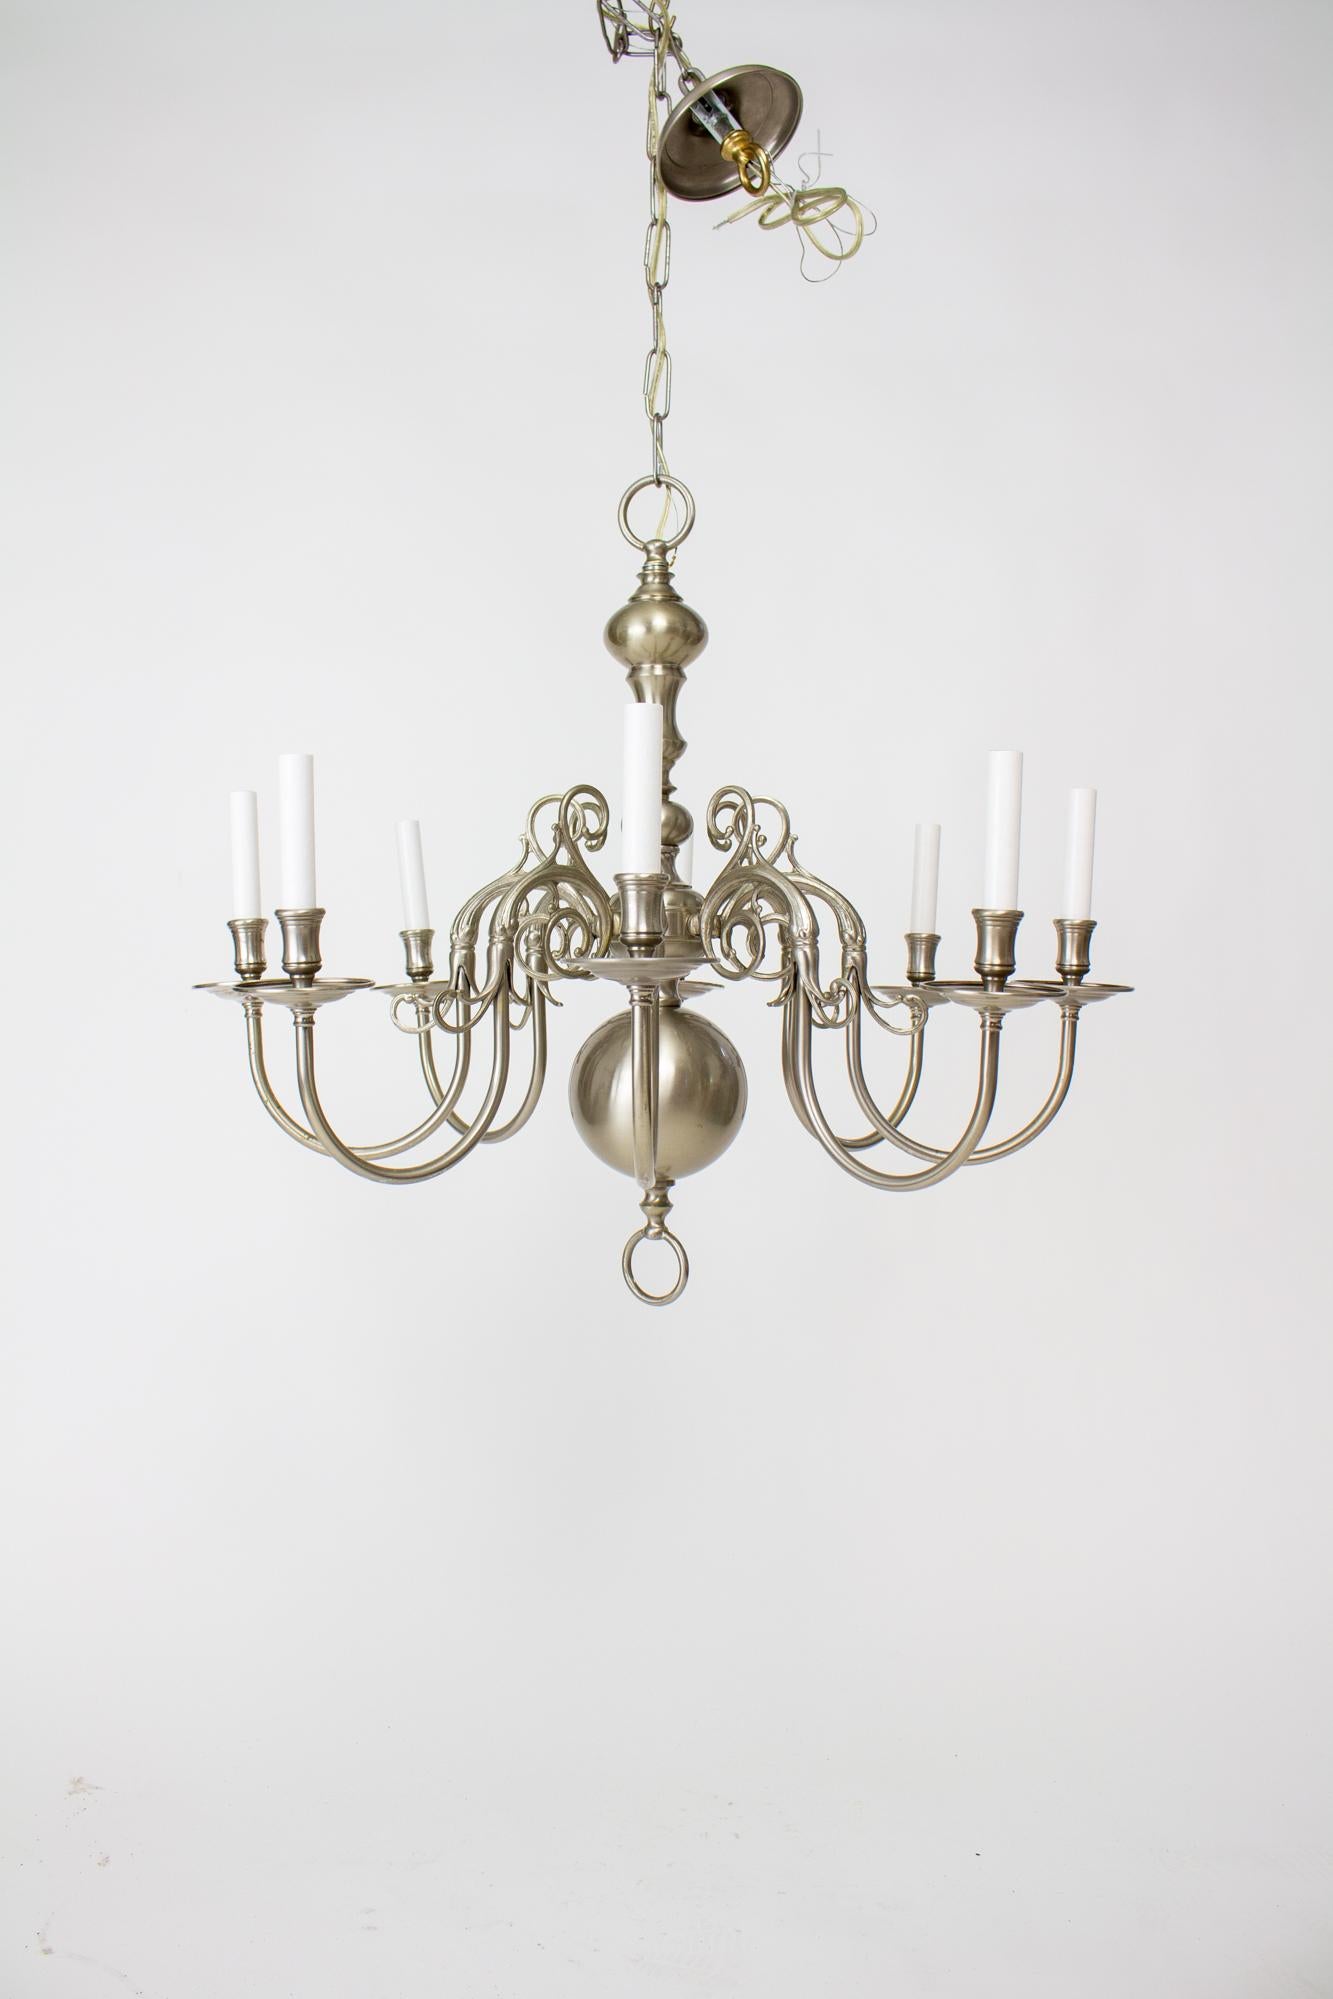 20th Century nickel 8 arm colonial style chandelier. Antique brushed nickel plated finish. Eight delicate curved arms extend from the central stem. Traditional ball on the bottom, in the dutch colonial style. Mid 20th Century, American. Condition: